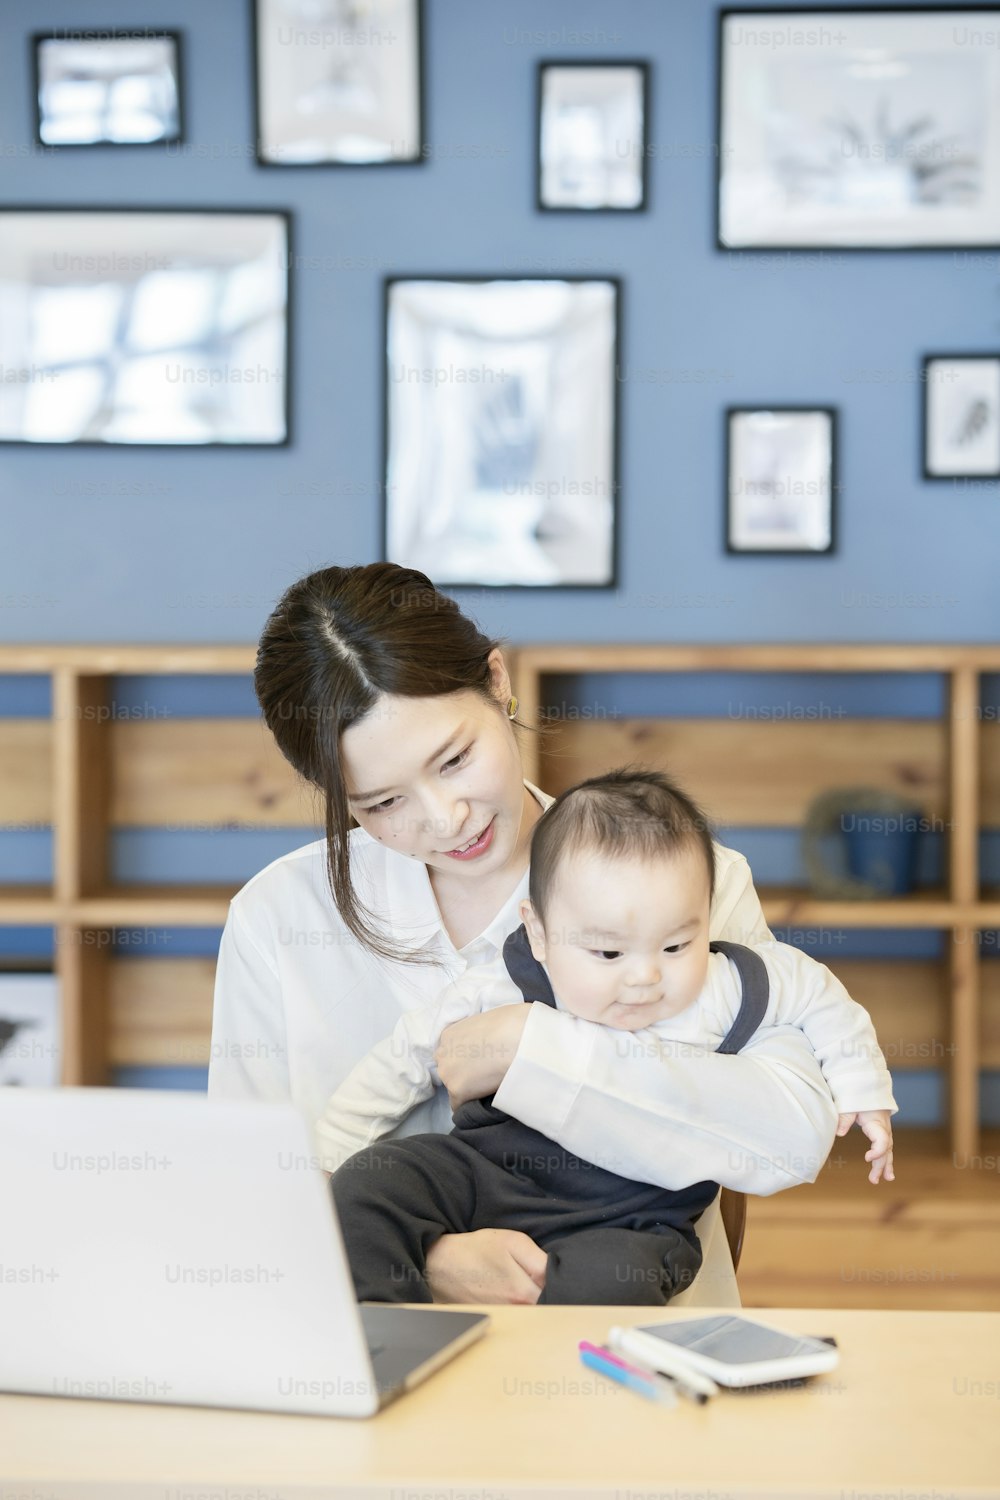 Asian woman holding a baby and operating a laptop indoors